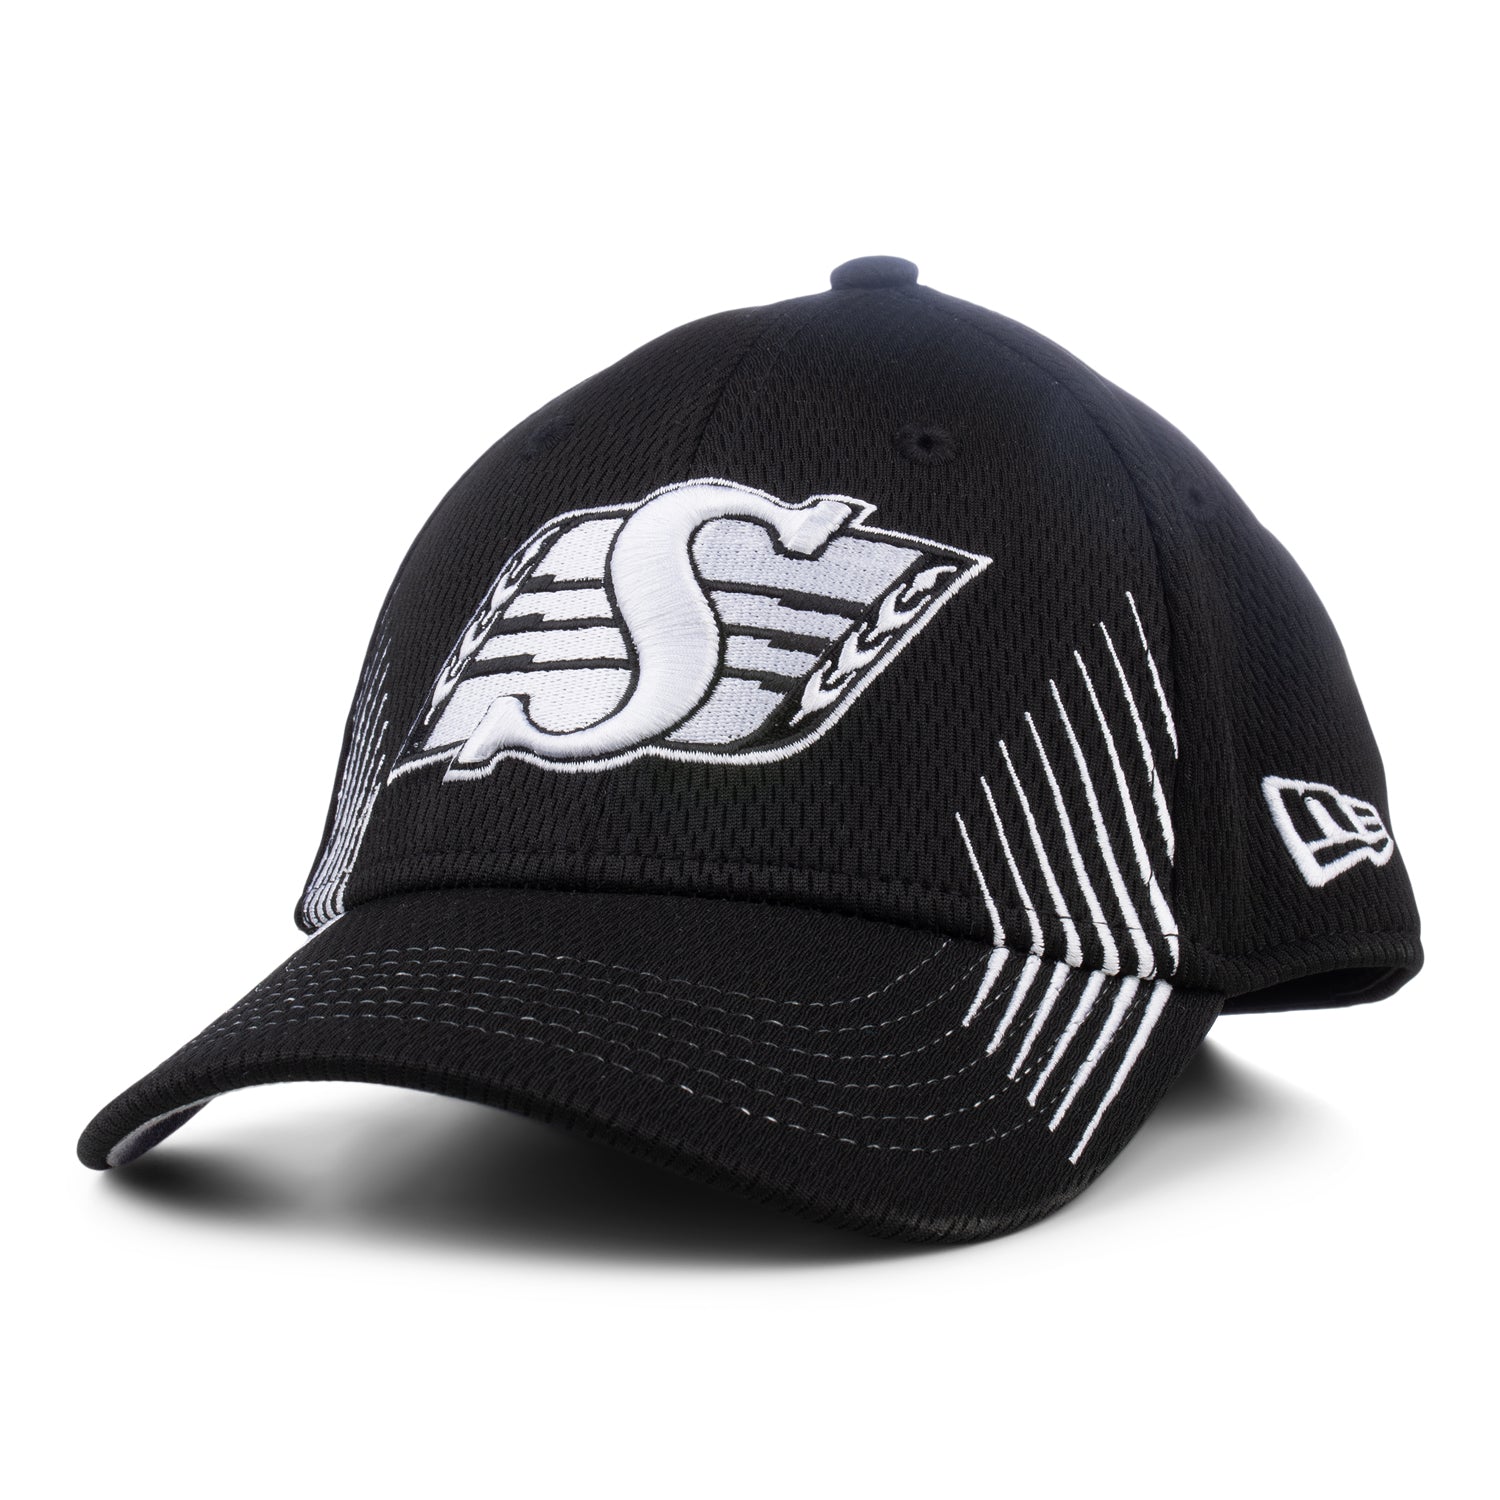 Youth 3930 Active Cap